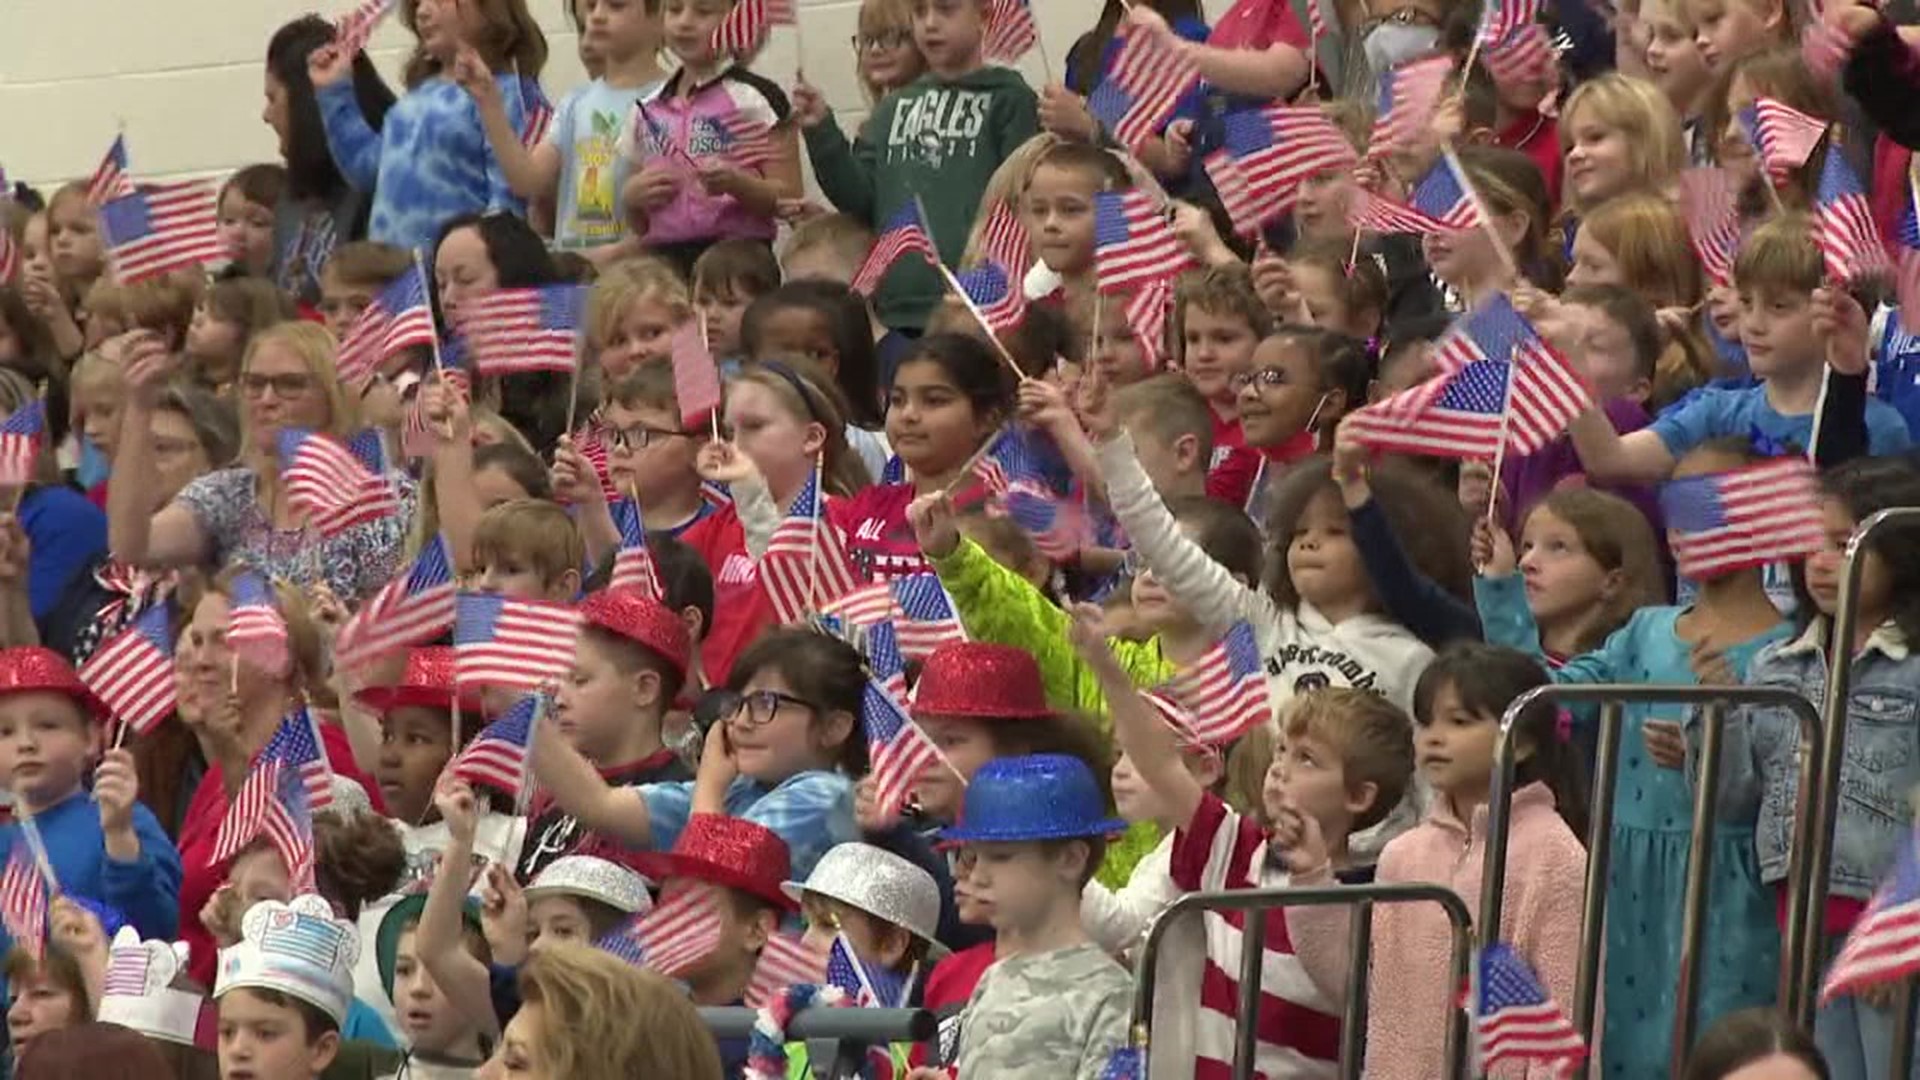 Nearly 900 students from Pleasant Valley Elementary School in Polk Township celebrated Veterans Day.